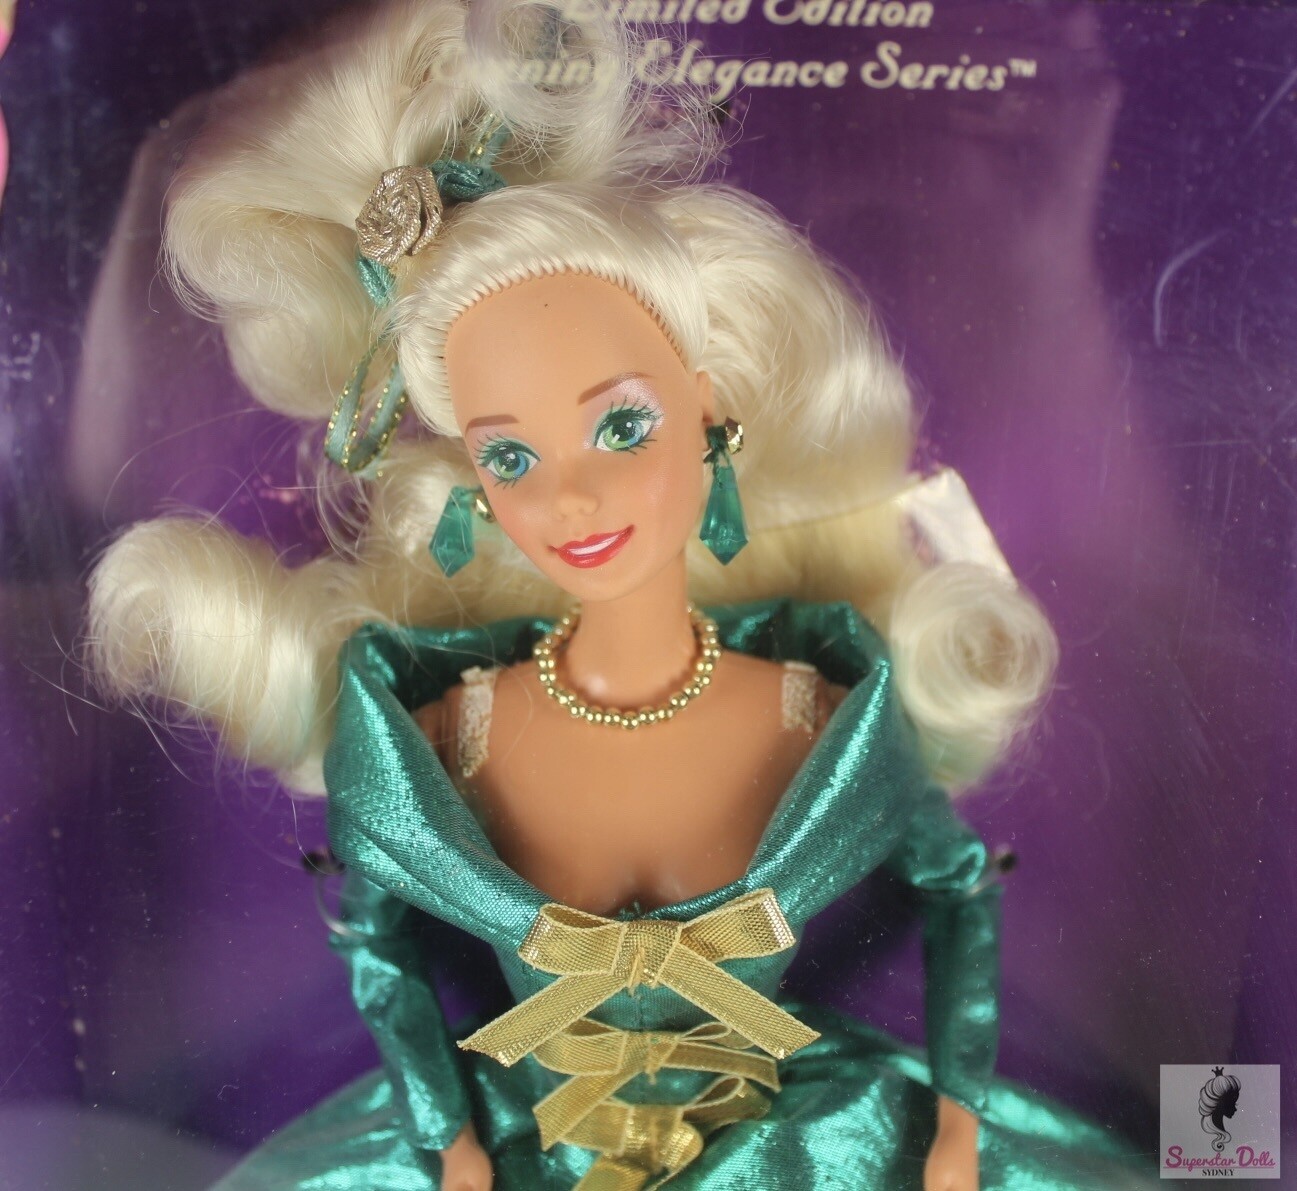 1995 Special Edition: Royal Enchantment Barbie Doll